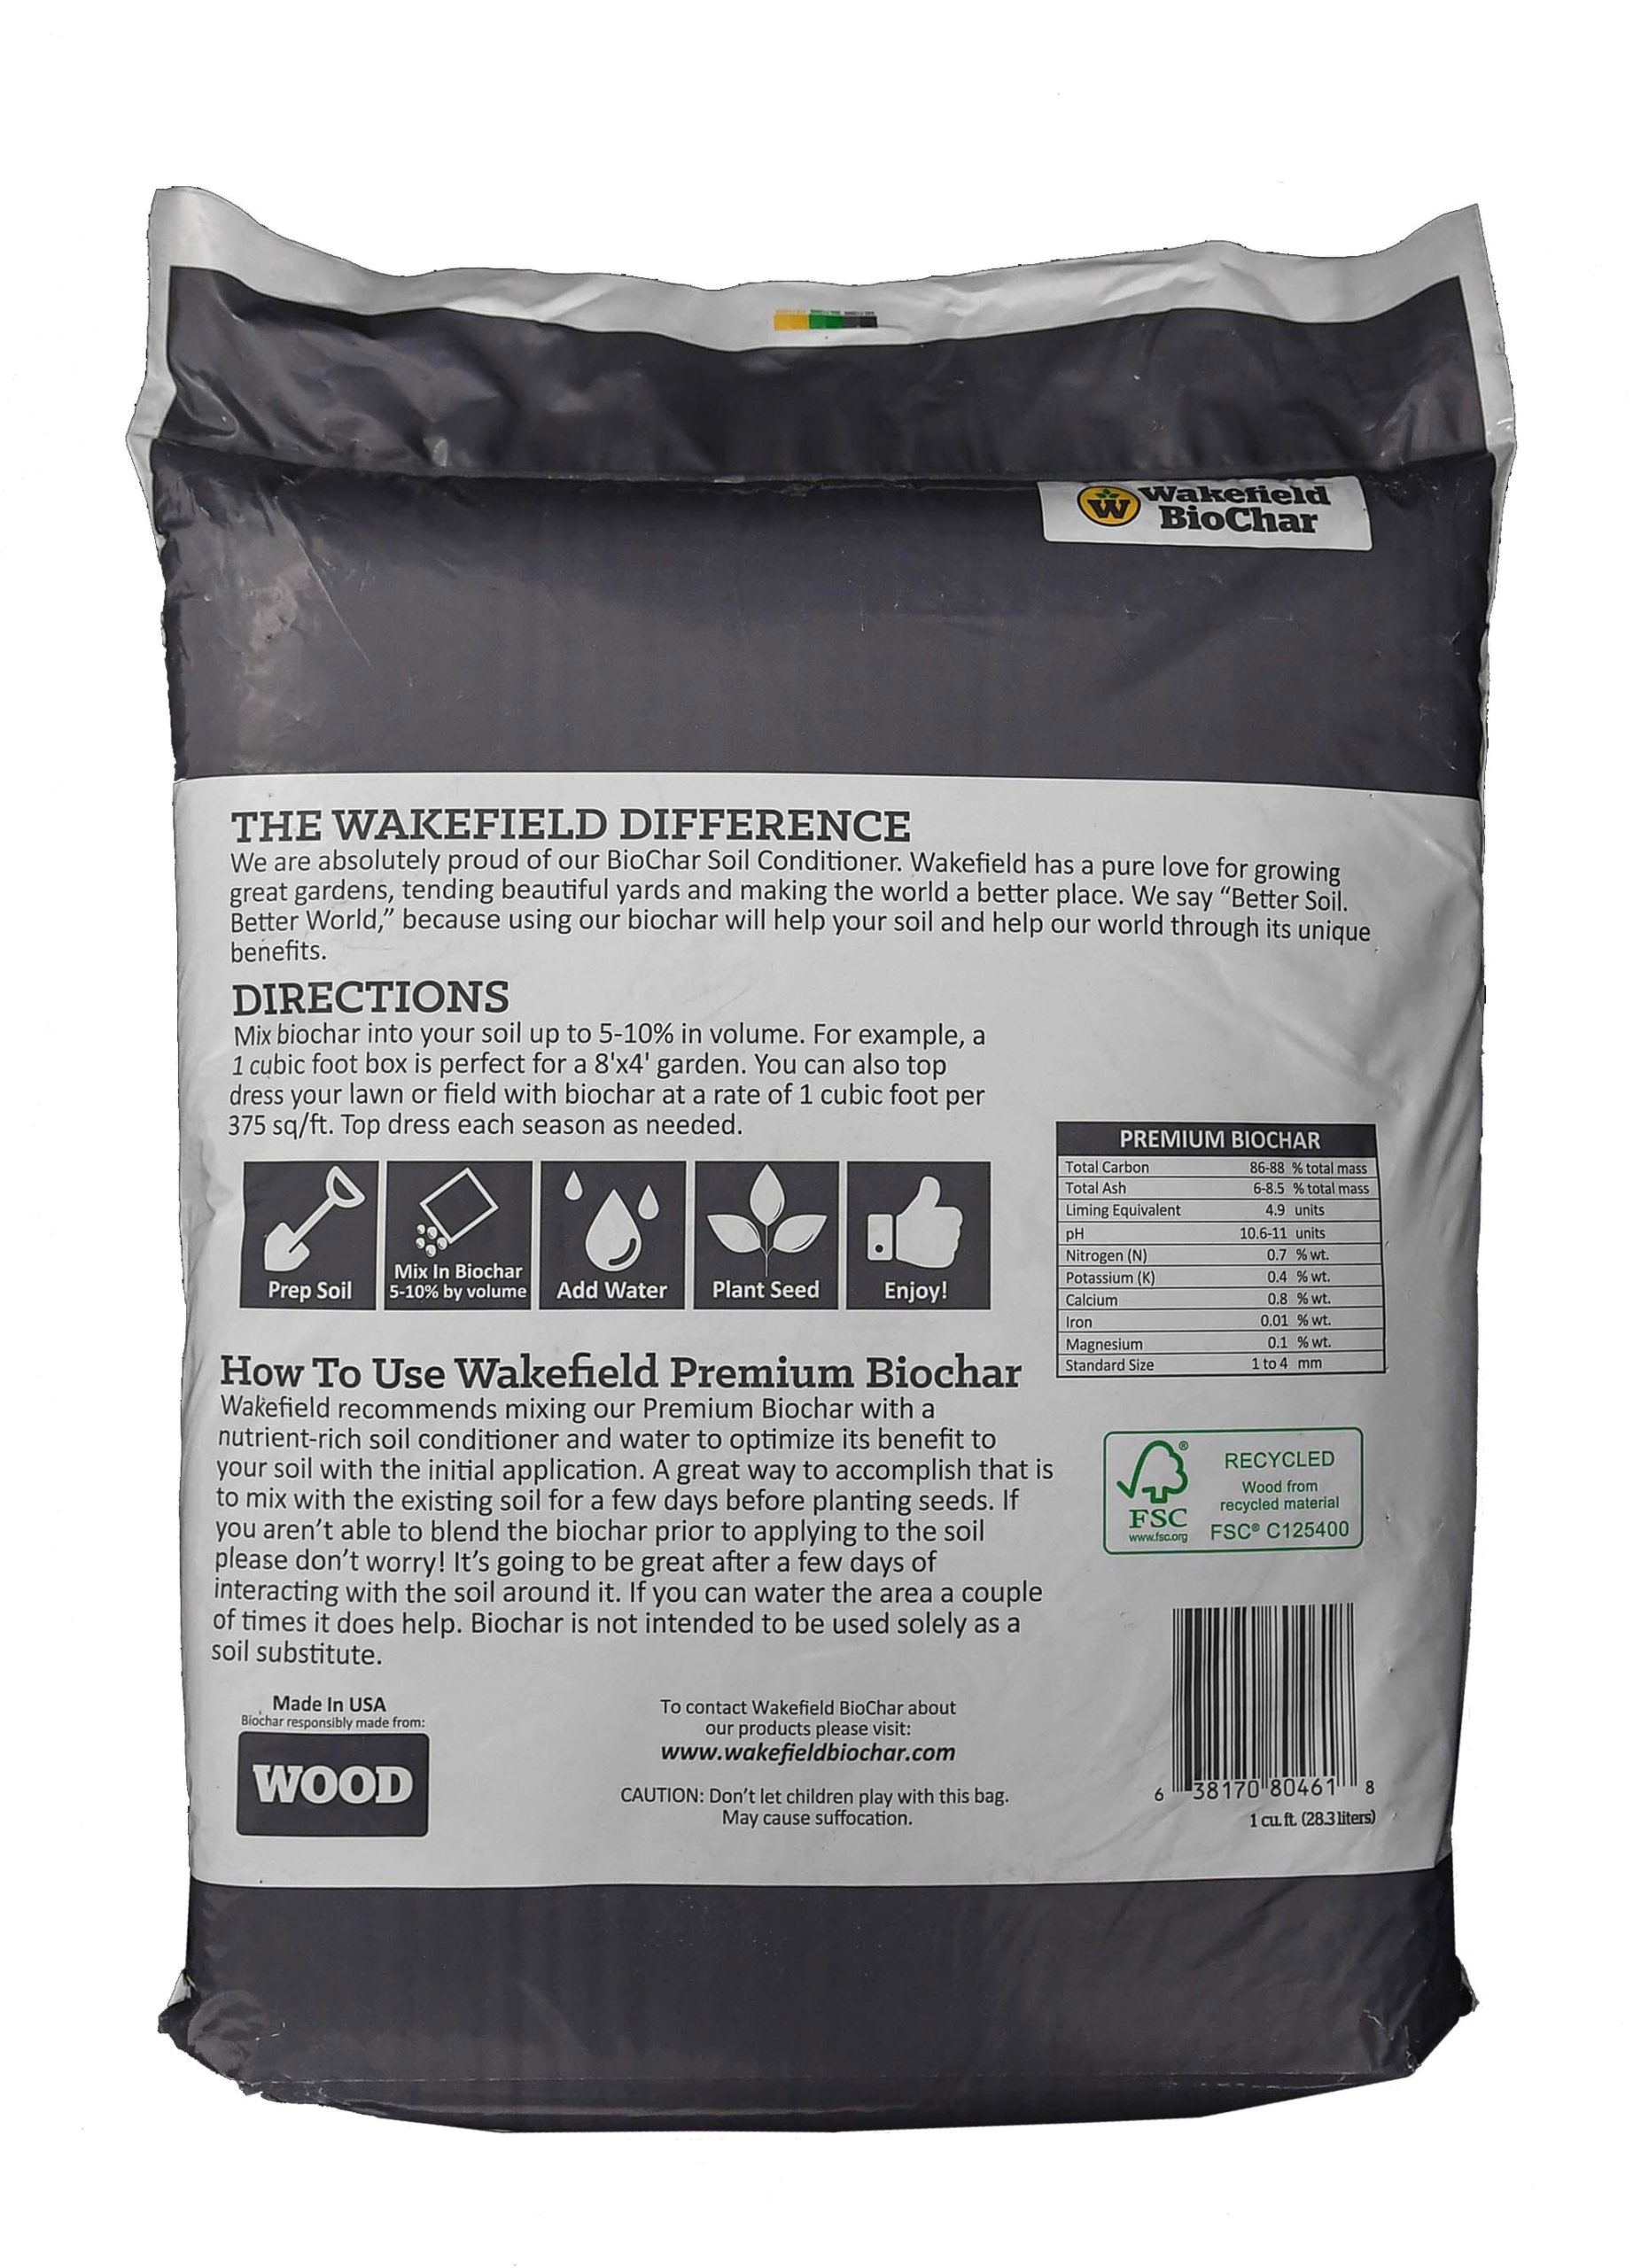 Potting Mix 1 Gallon 3.5 pounds – Organic Bio Char for Raised Bed & Vegetable Gardens Lawns Activated Charcoal for Plants, Horticultural Charcoal Wakefield BioChar – Premium Soil Conditioner 